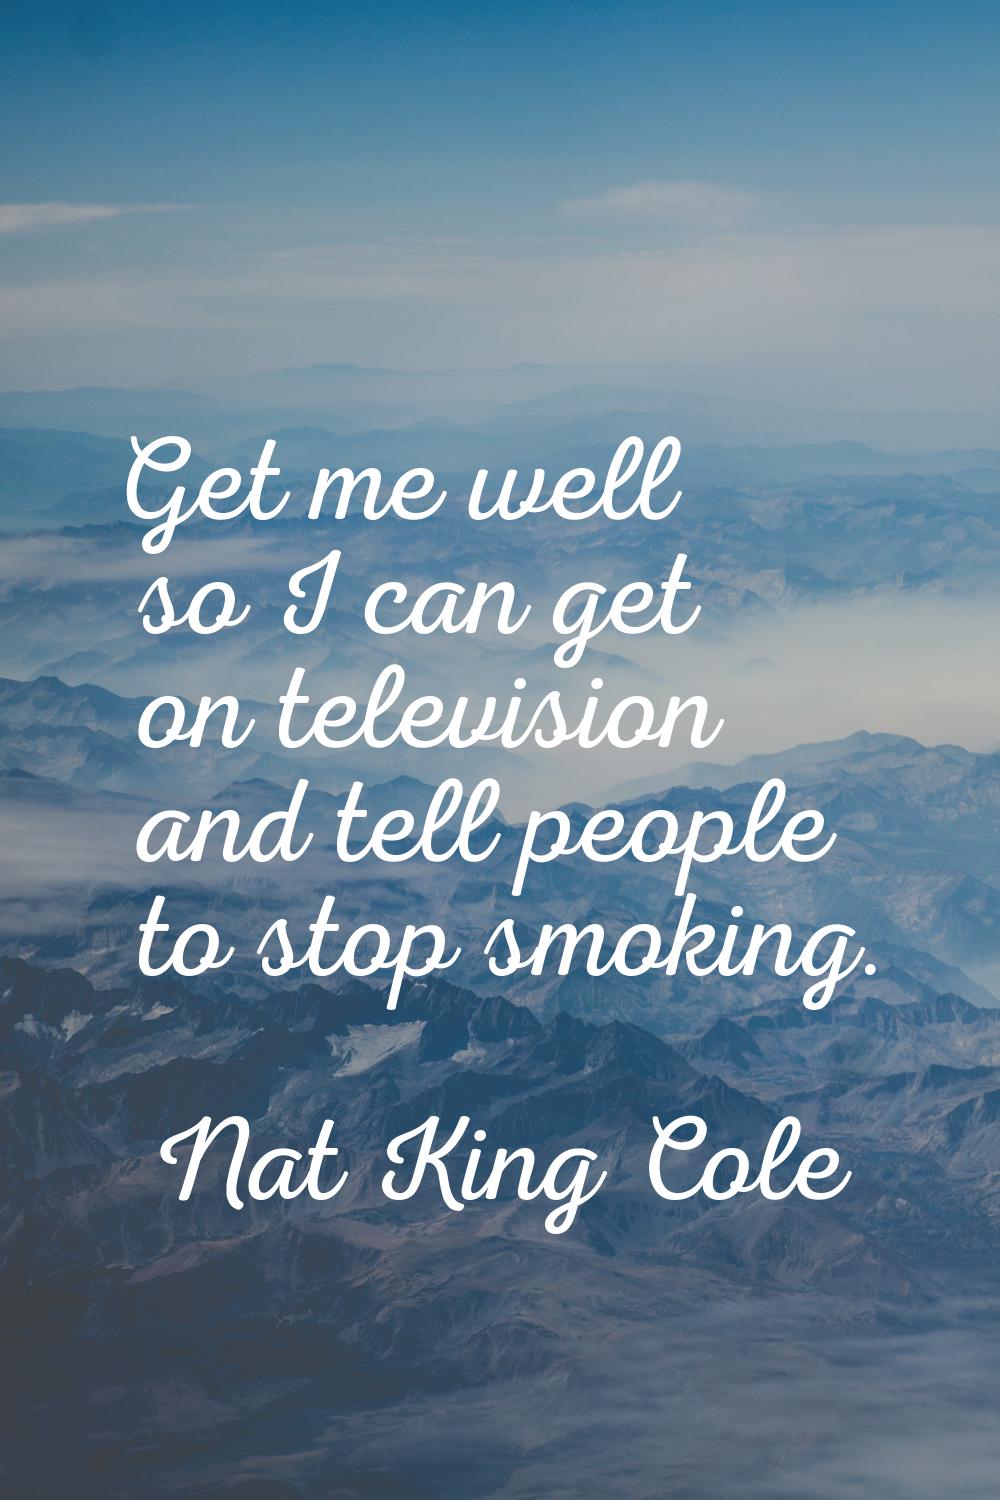 Get me well so I can get on television and tell people to stop smoking.